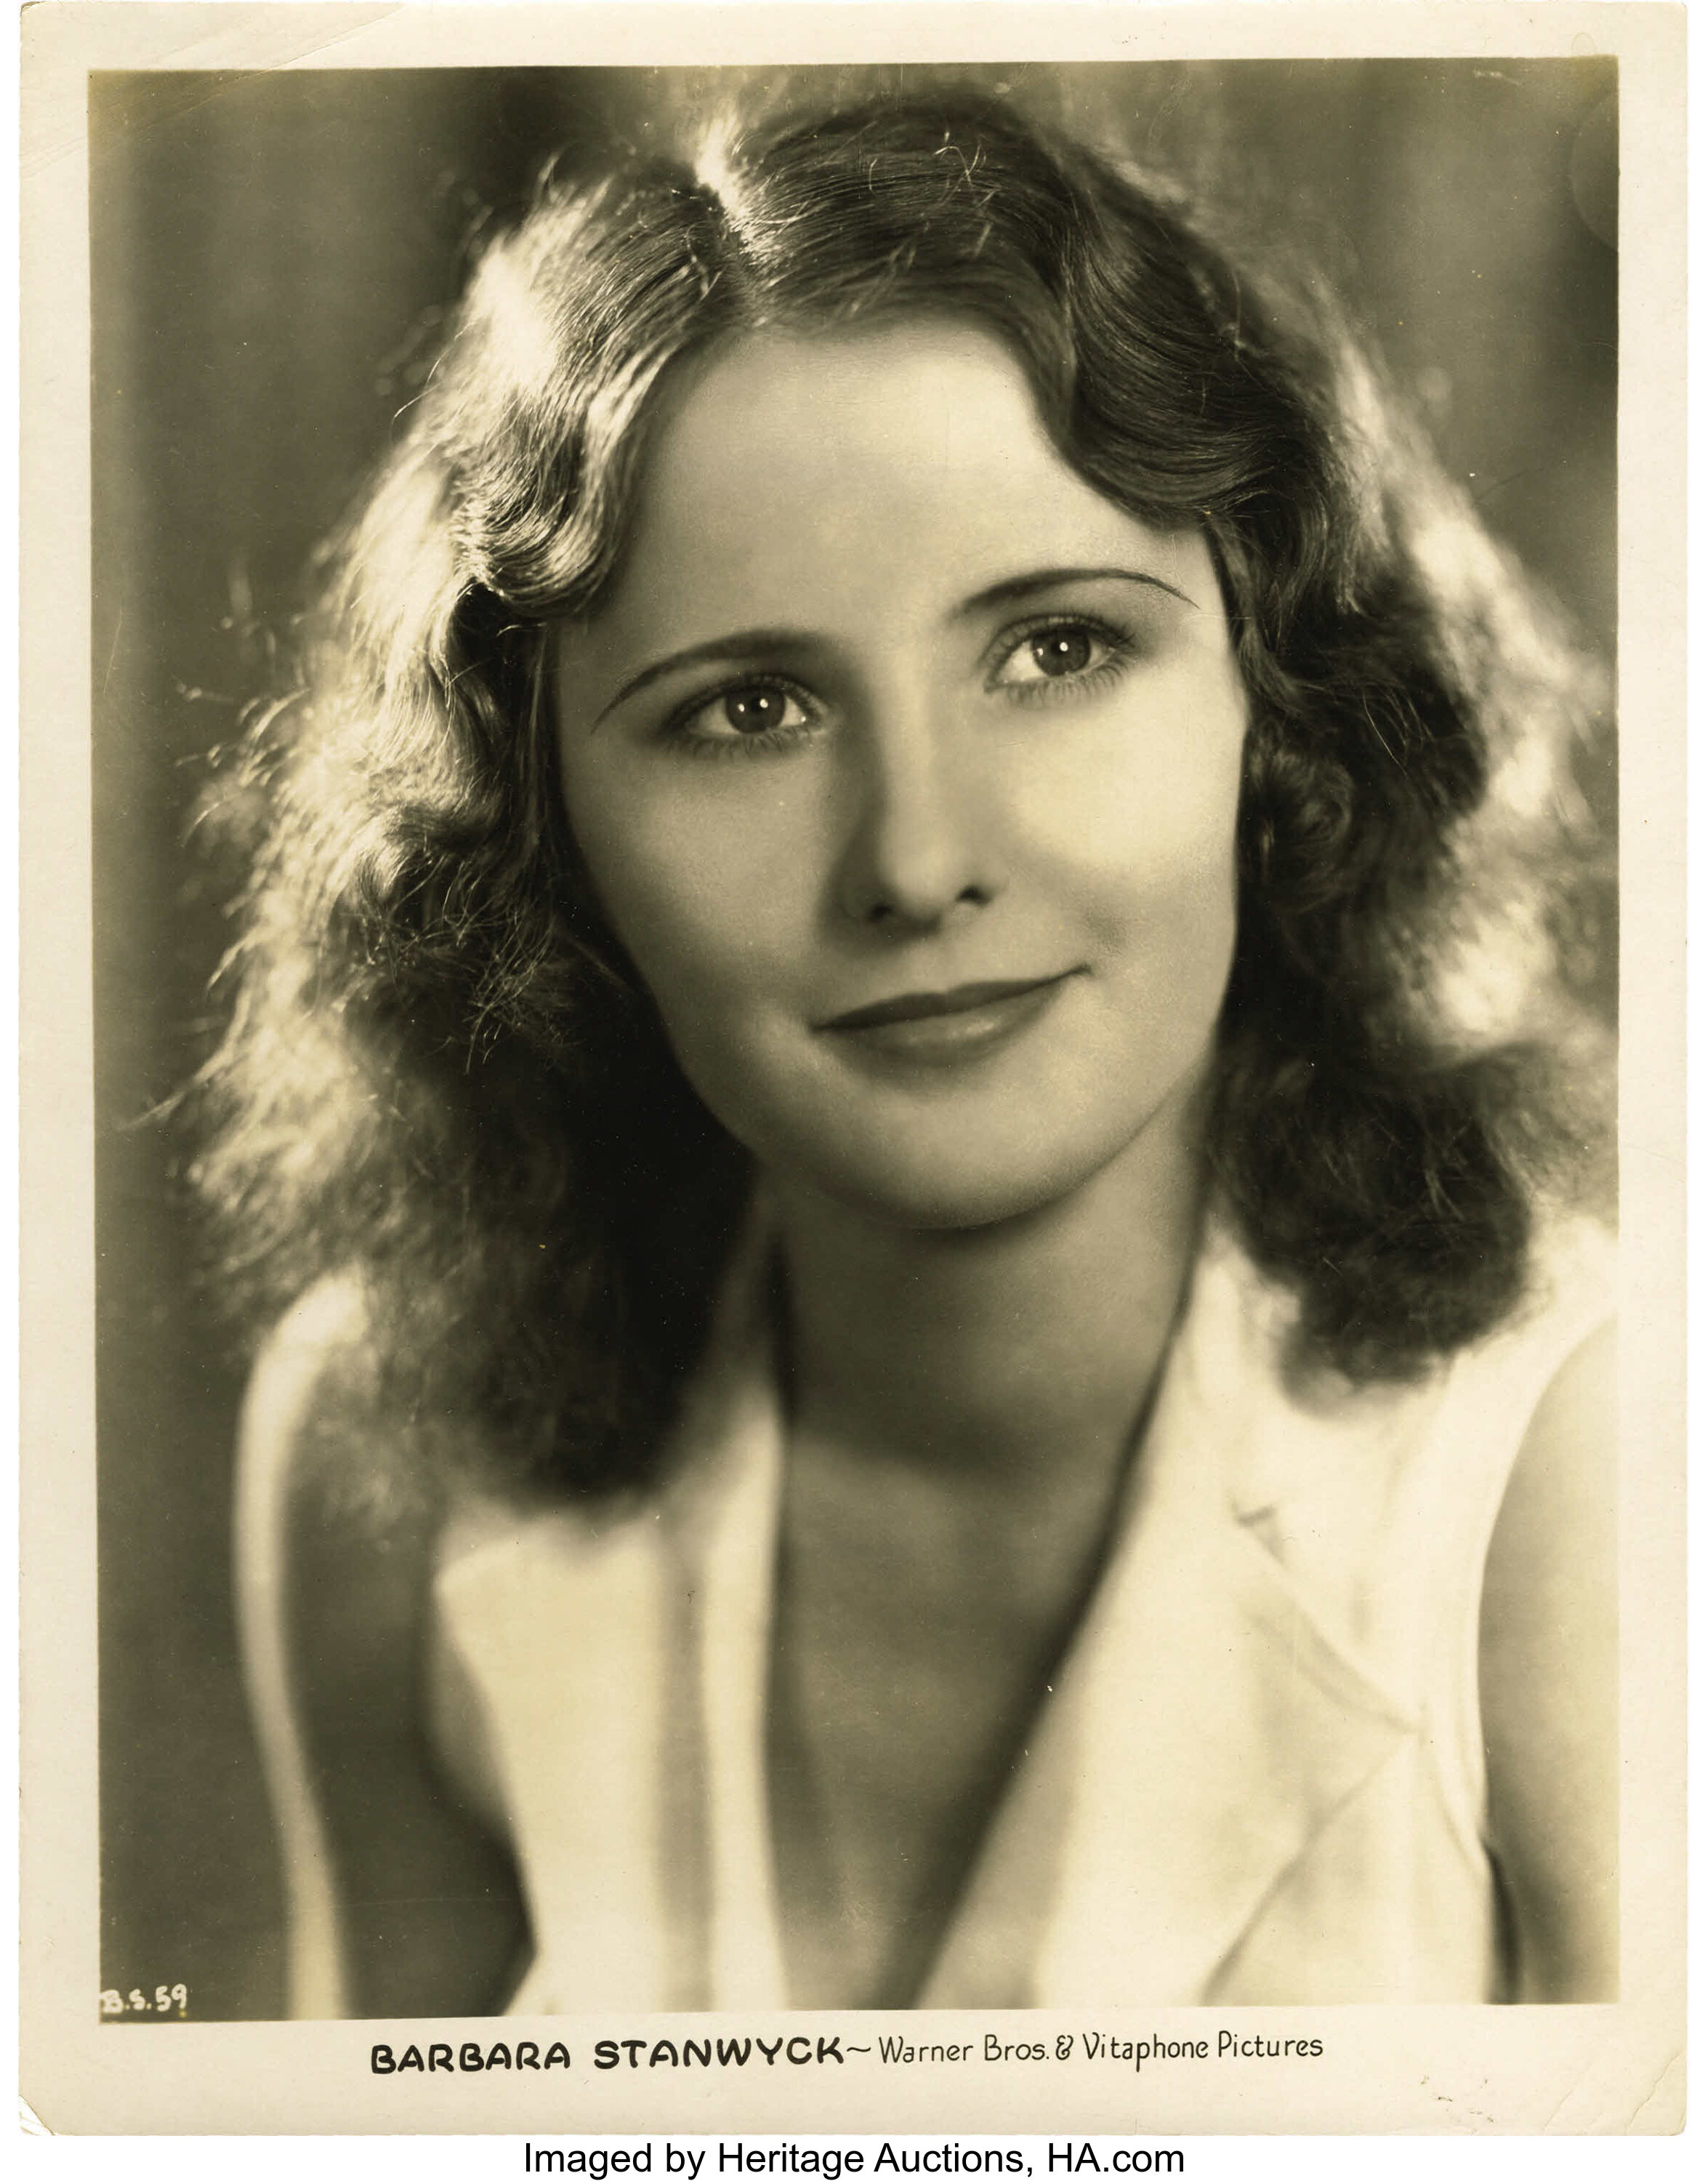 Porn Nude Barbara Stanwyck 1930s - Barbara Stanwyck Portrait Still (Warner Brothers, early 1930s). | Lot  #28726 | Heritage Auctions